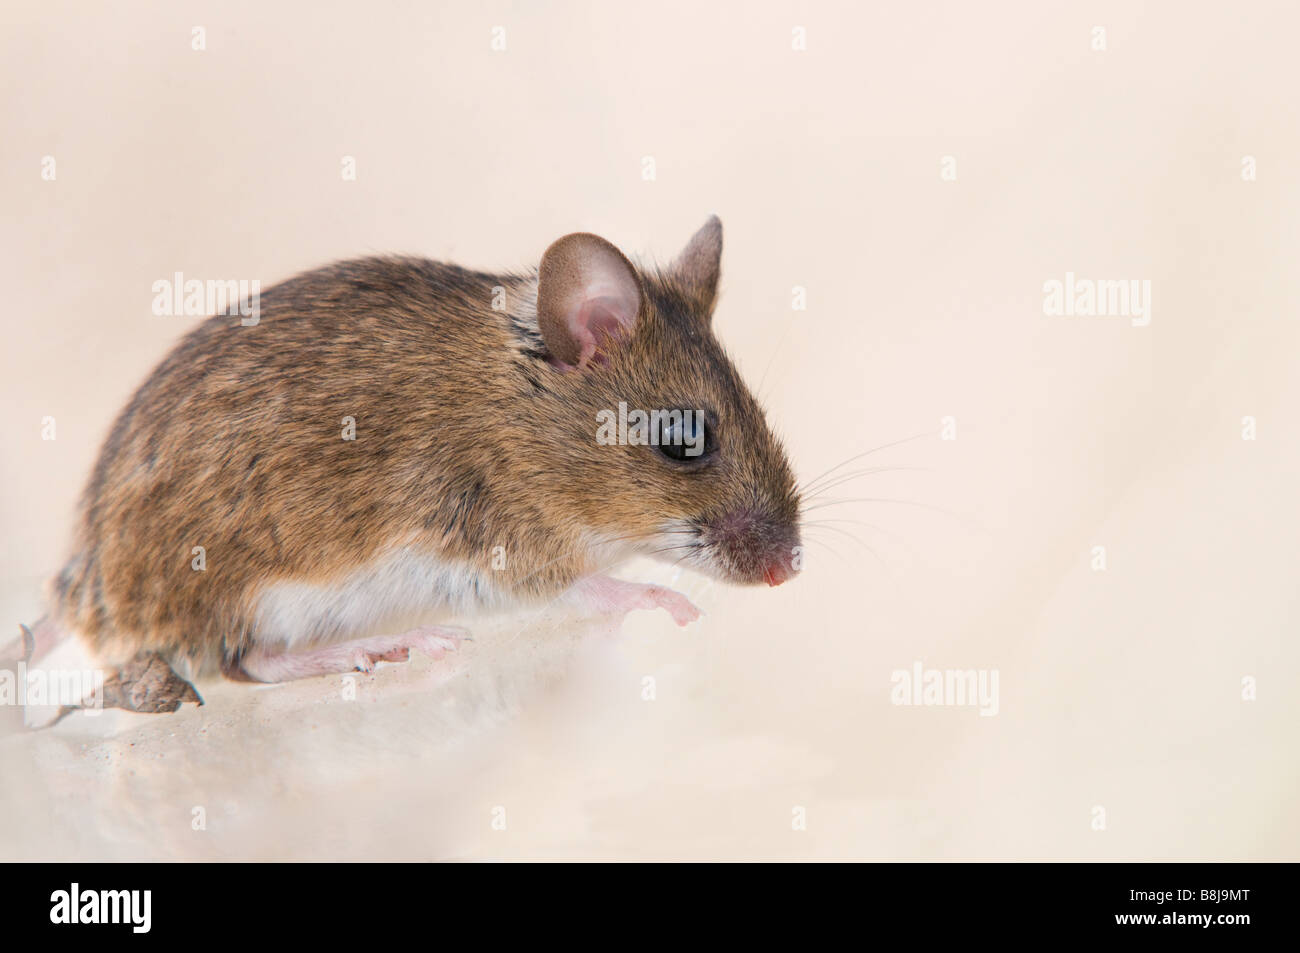 A wood mouse against a plain background Stock Photo